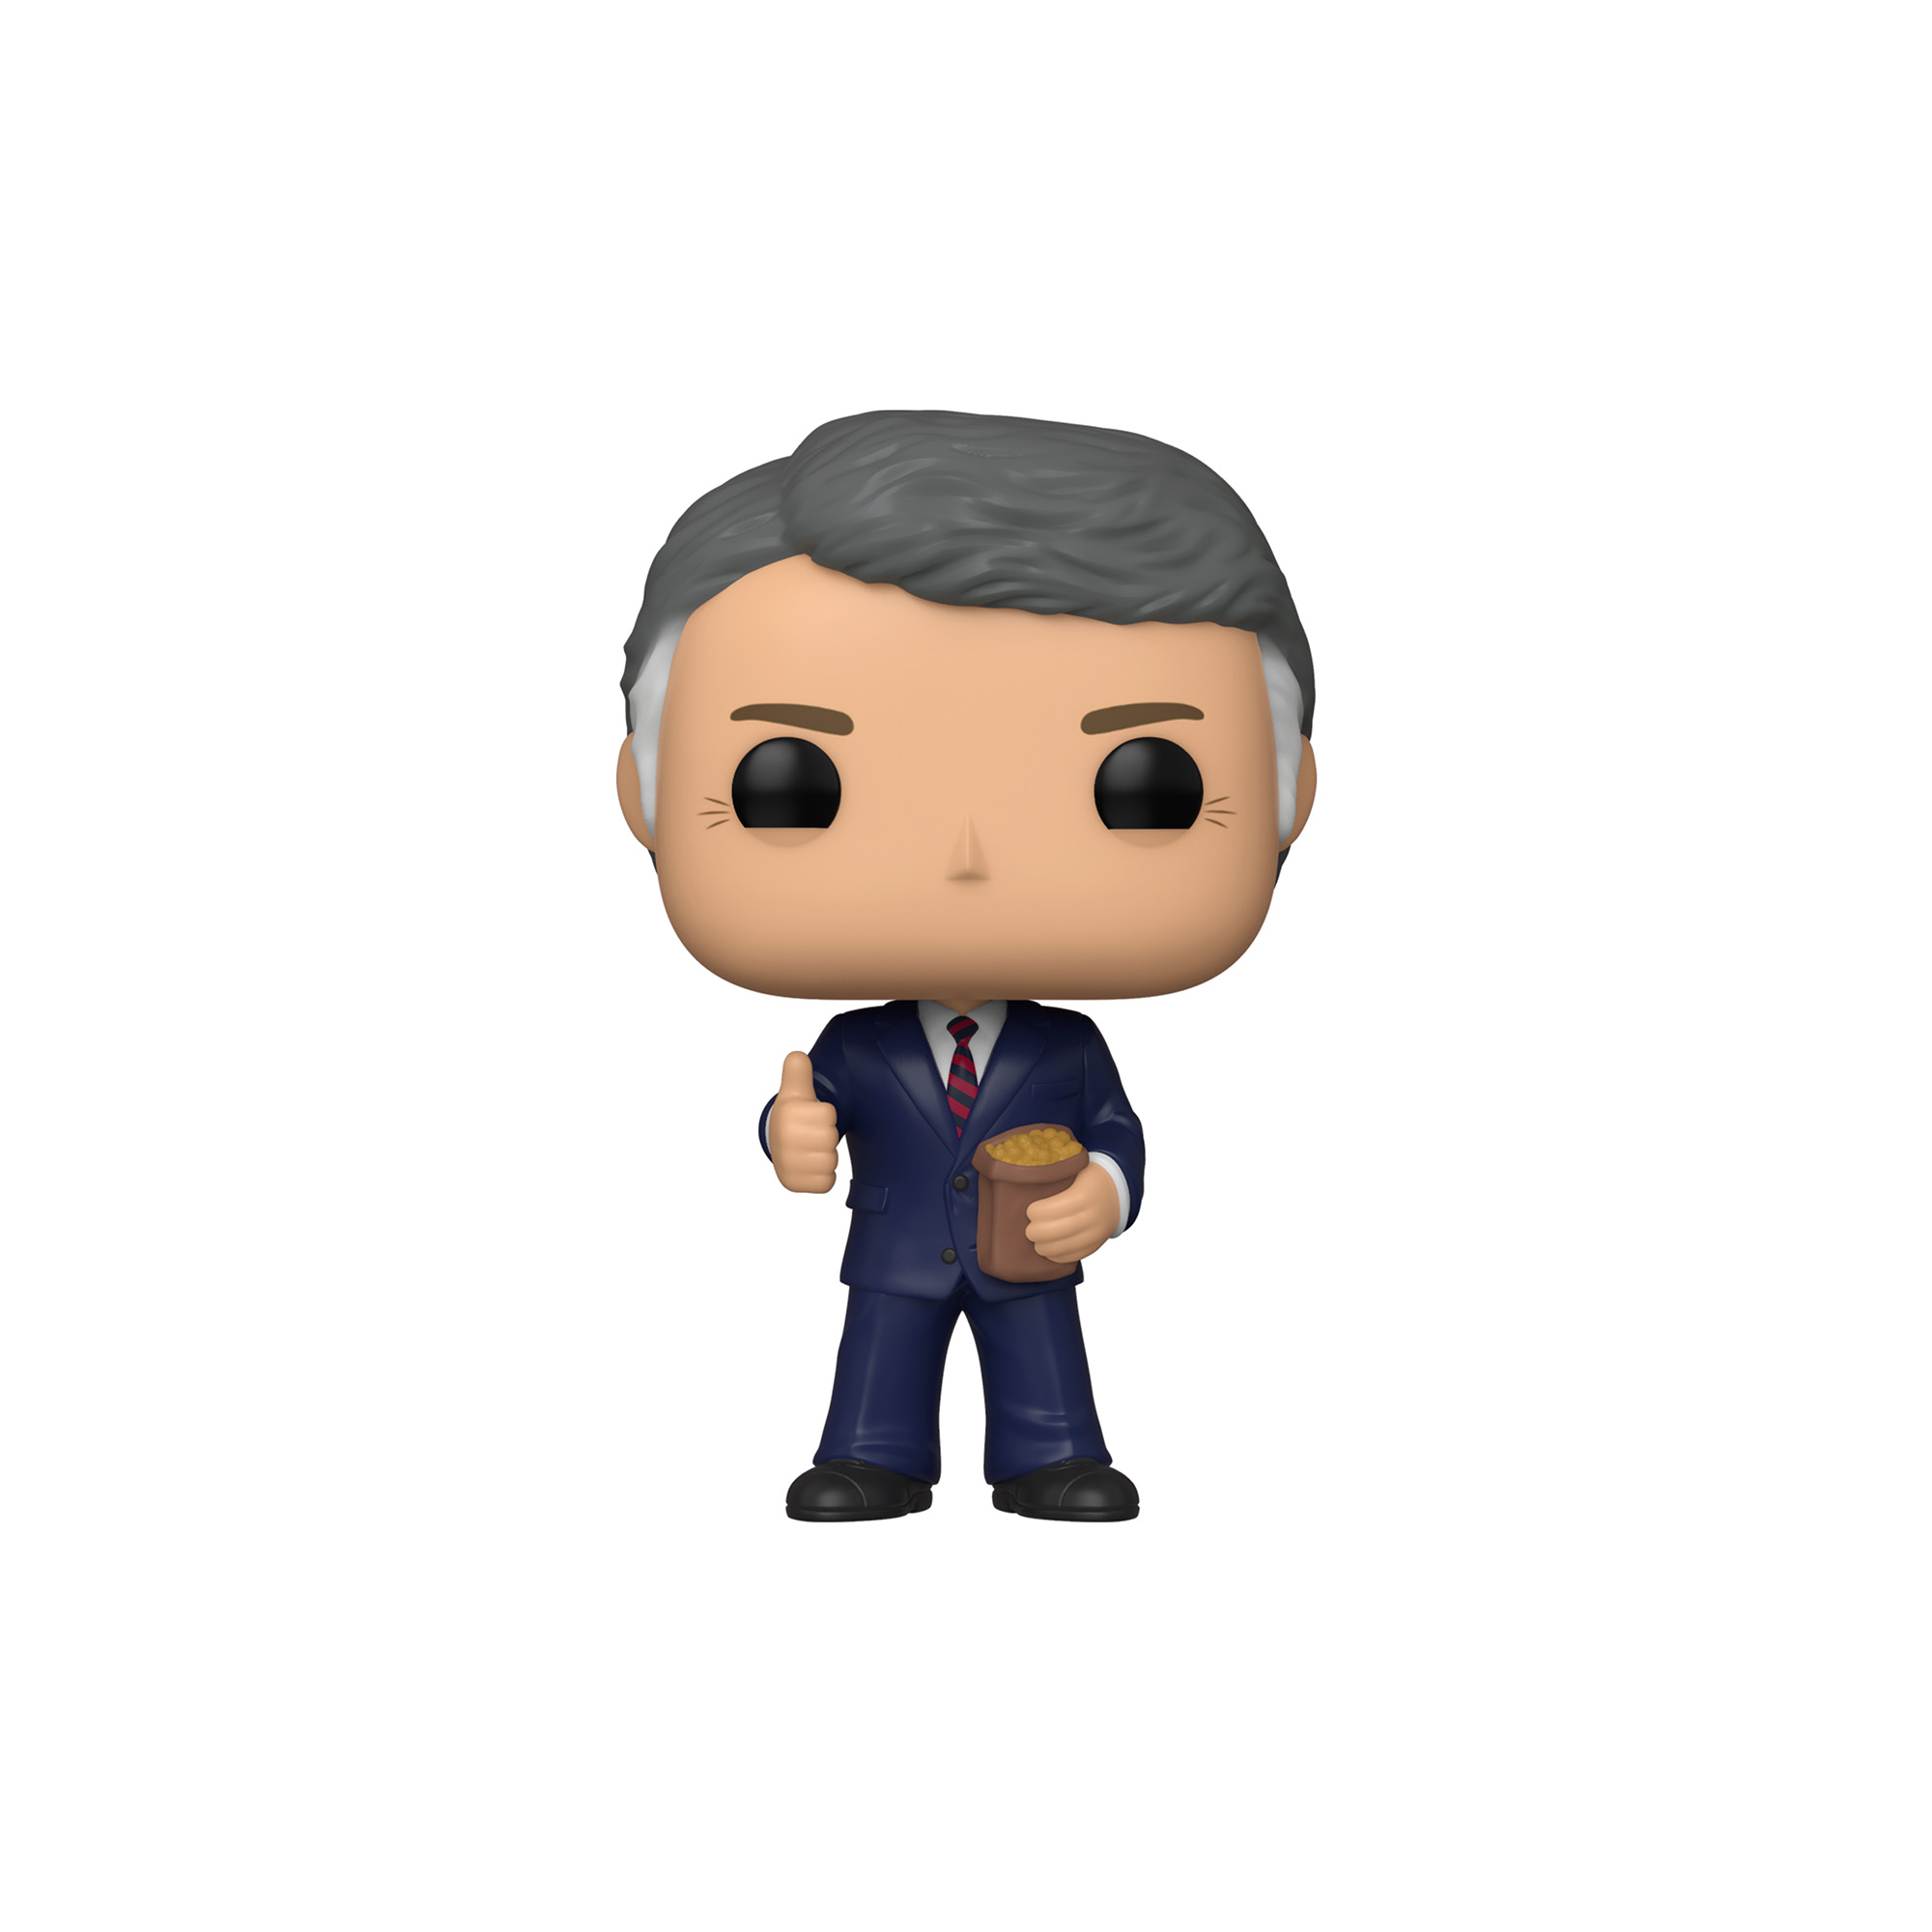 Funko POP! Icons: Jimmy Carter - image 2 of 2